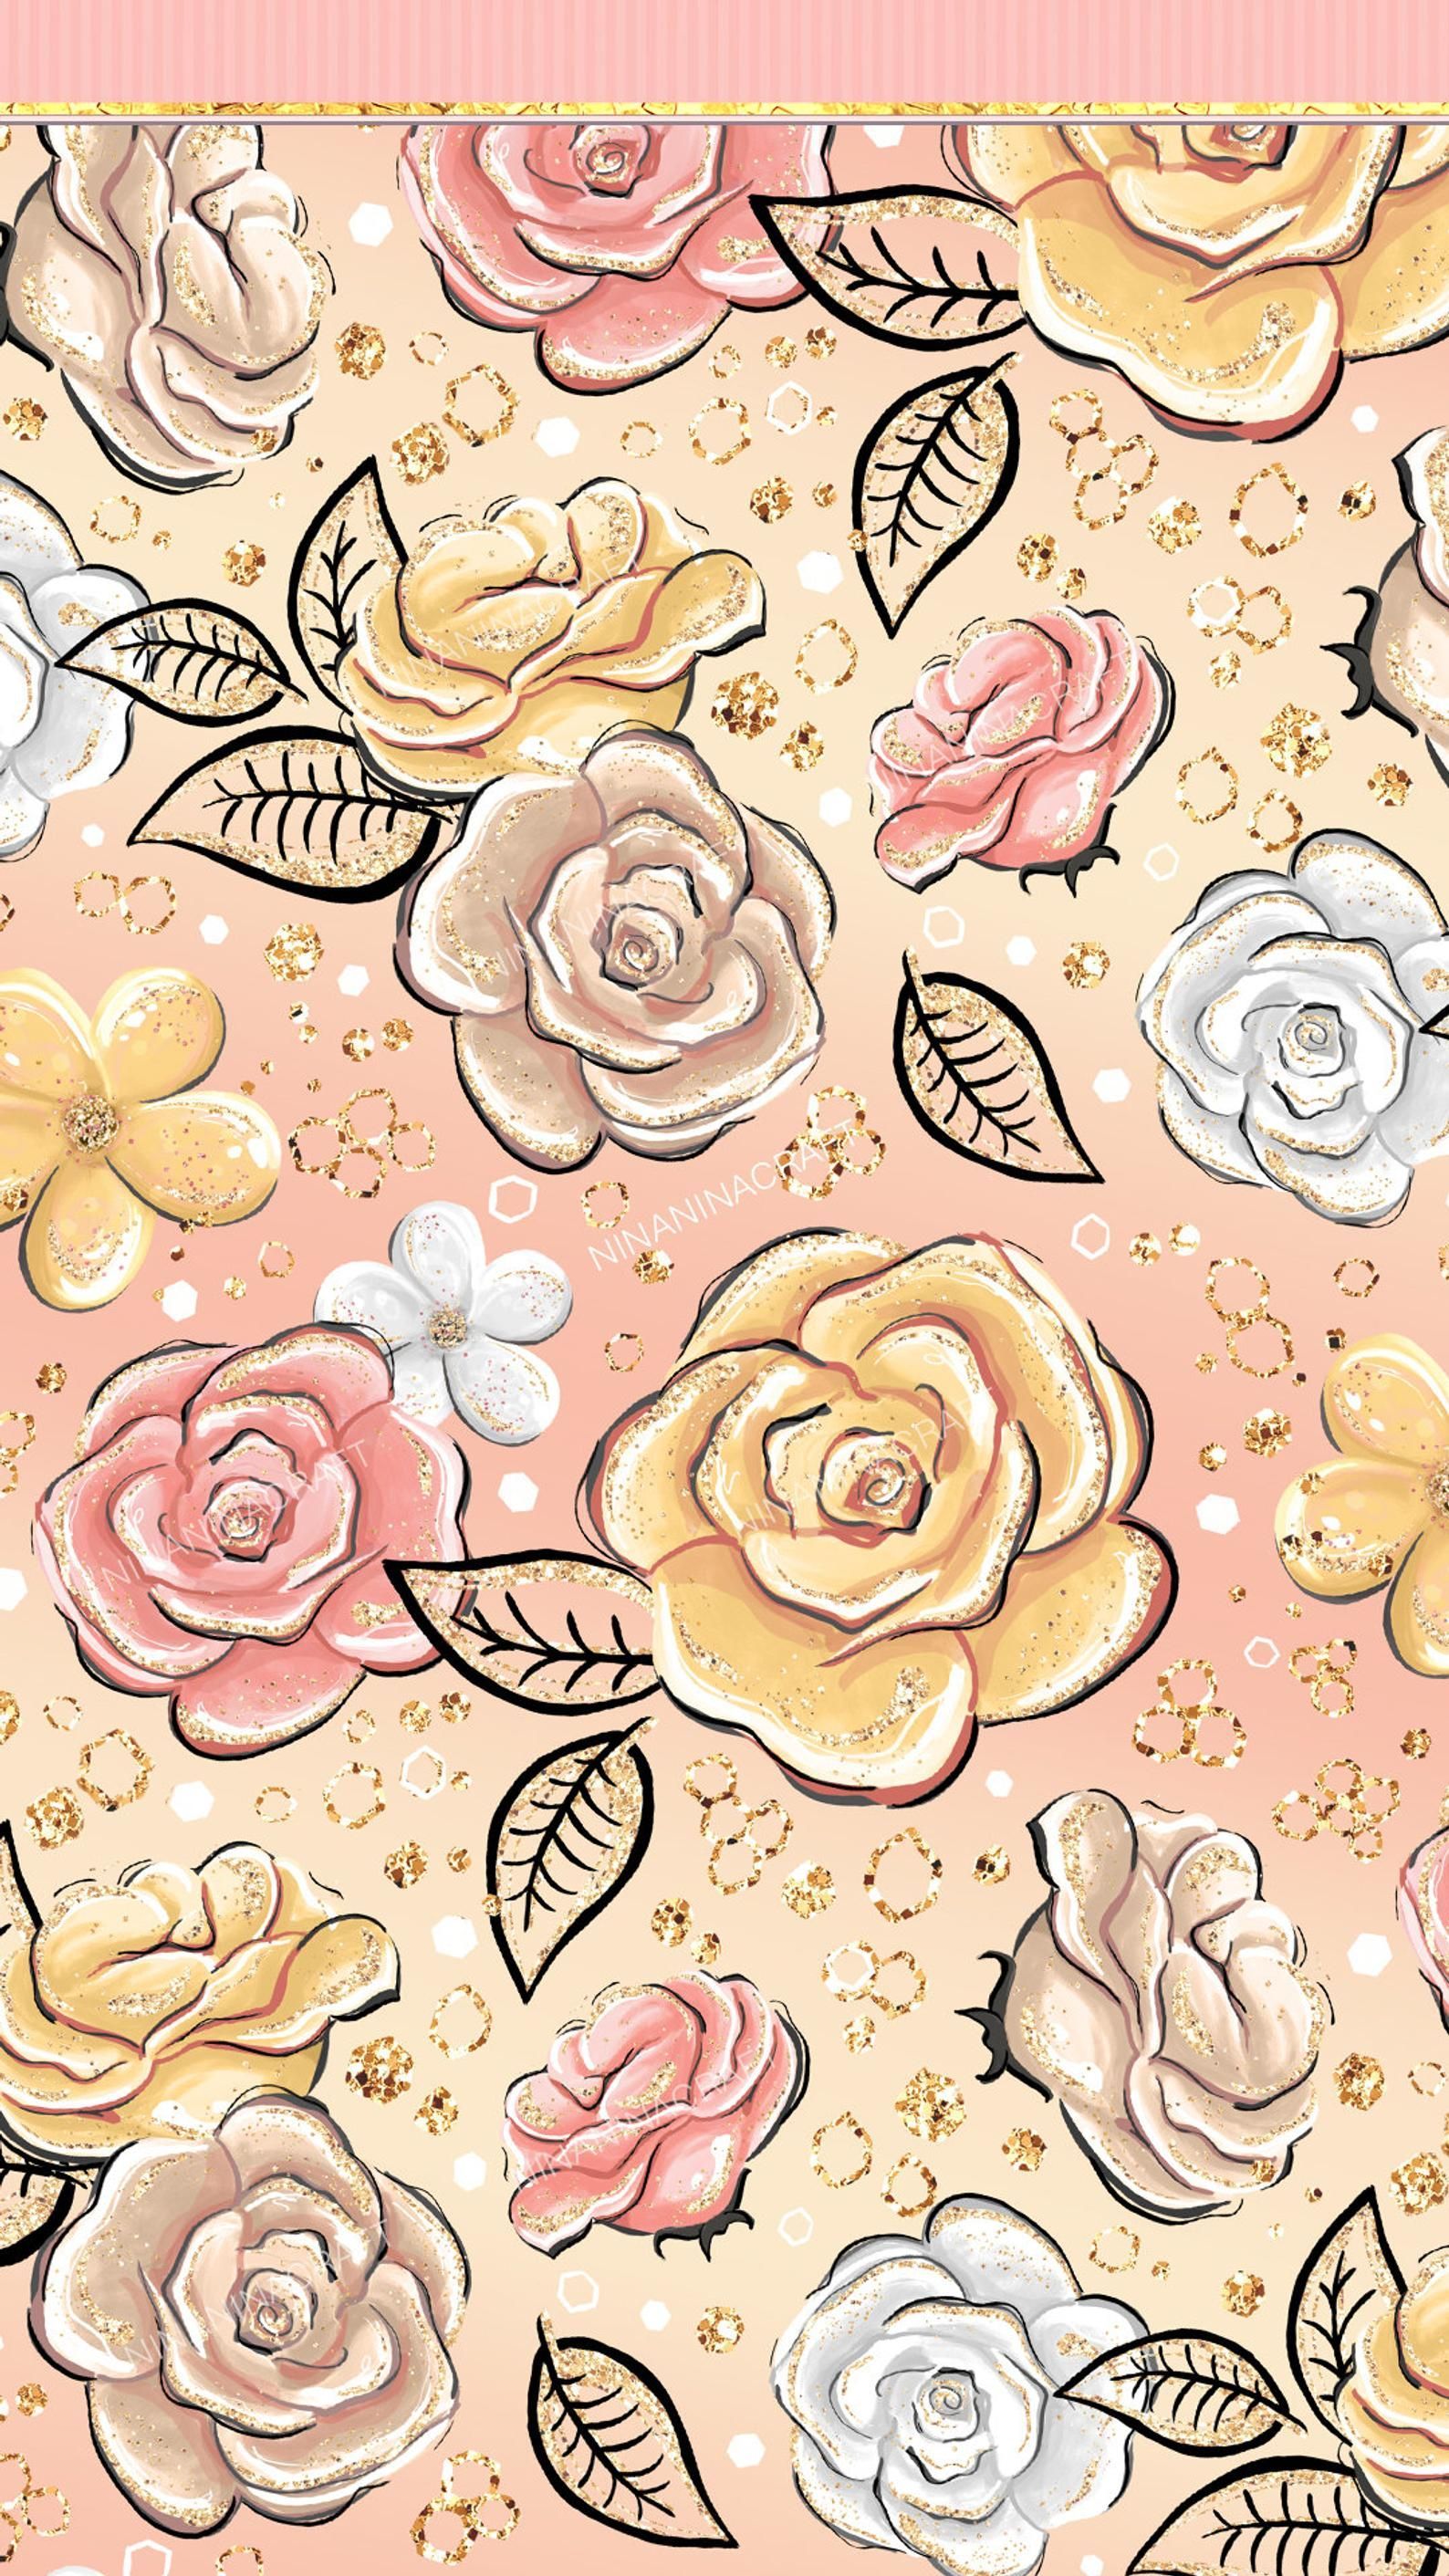 Honey Bee Digital Papers Fashion Seamless Patterns Gold. Etsy. Floral wallpaper iphone, Cute background, Flower phone wallpaper